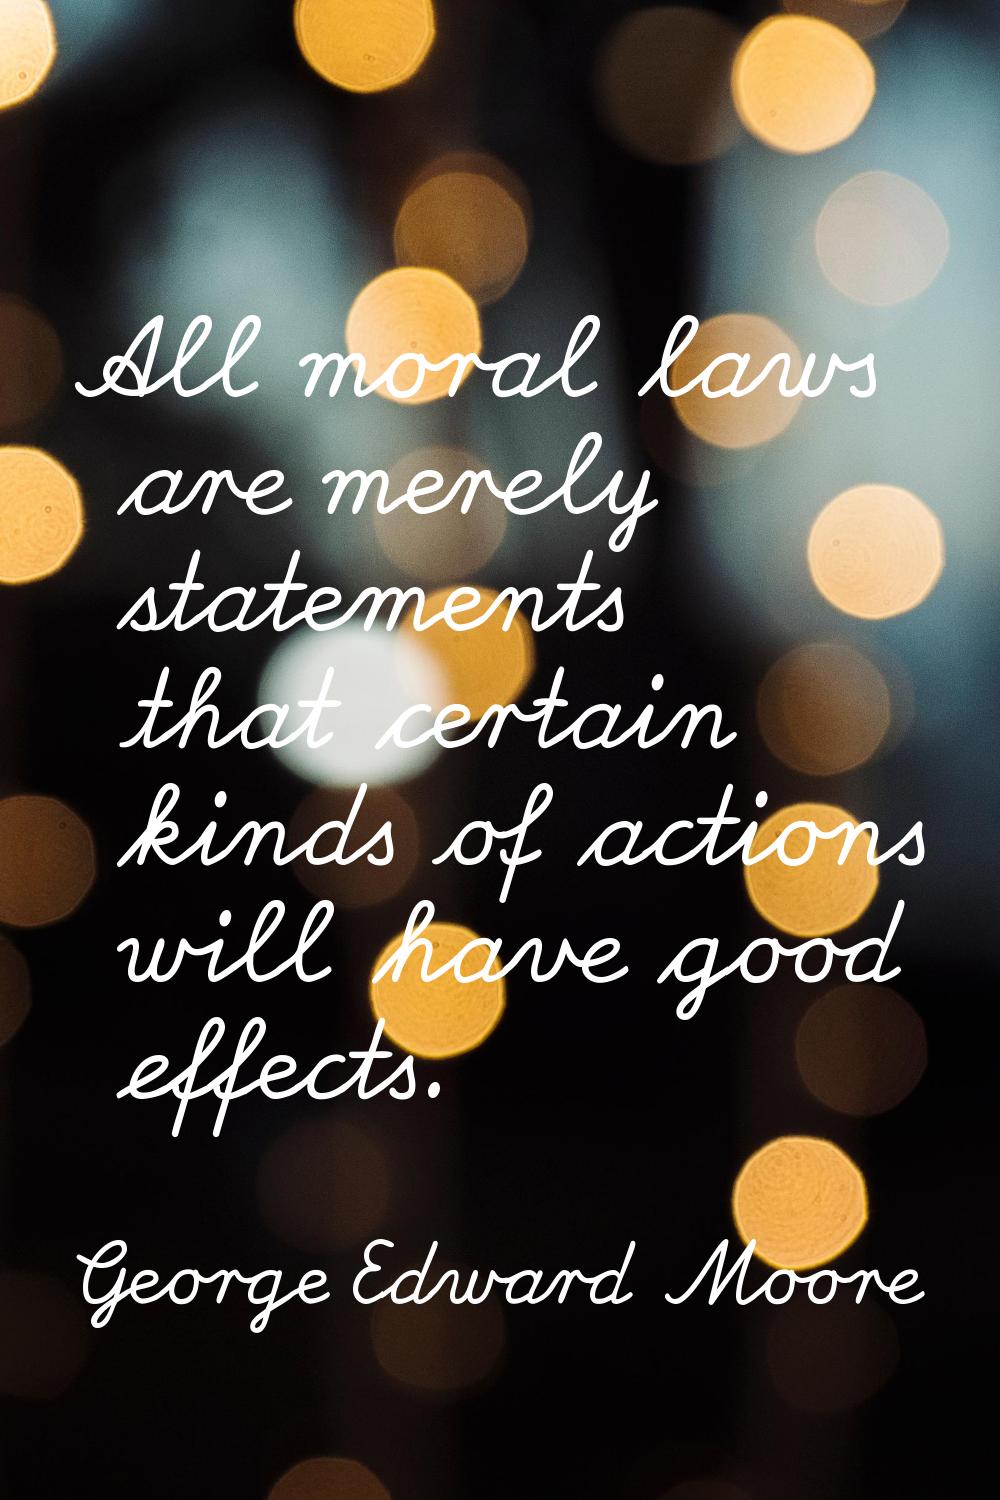 All moral laws are merely statements that certain kinds of actions will have good effects.